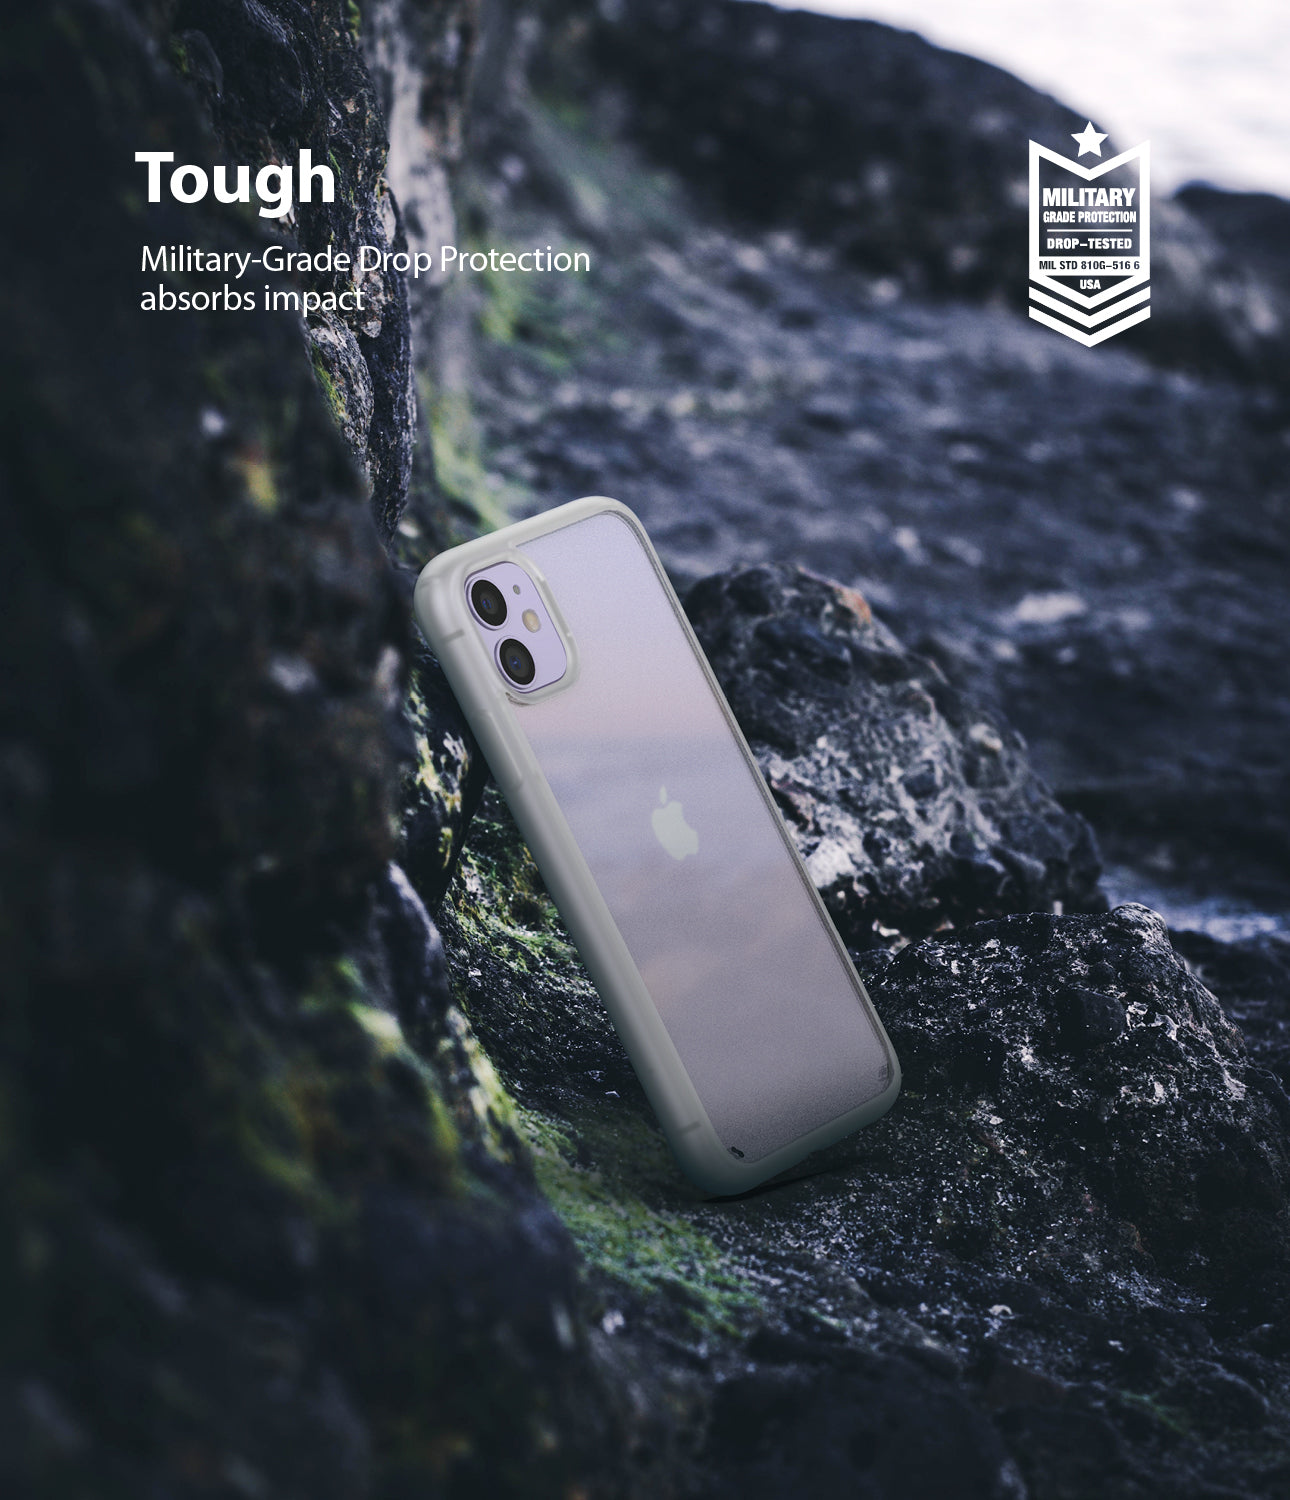 Ringke Fusion Matte for iPhone 11 Anti-Fingerprint Frosted PC Case Protection Tough